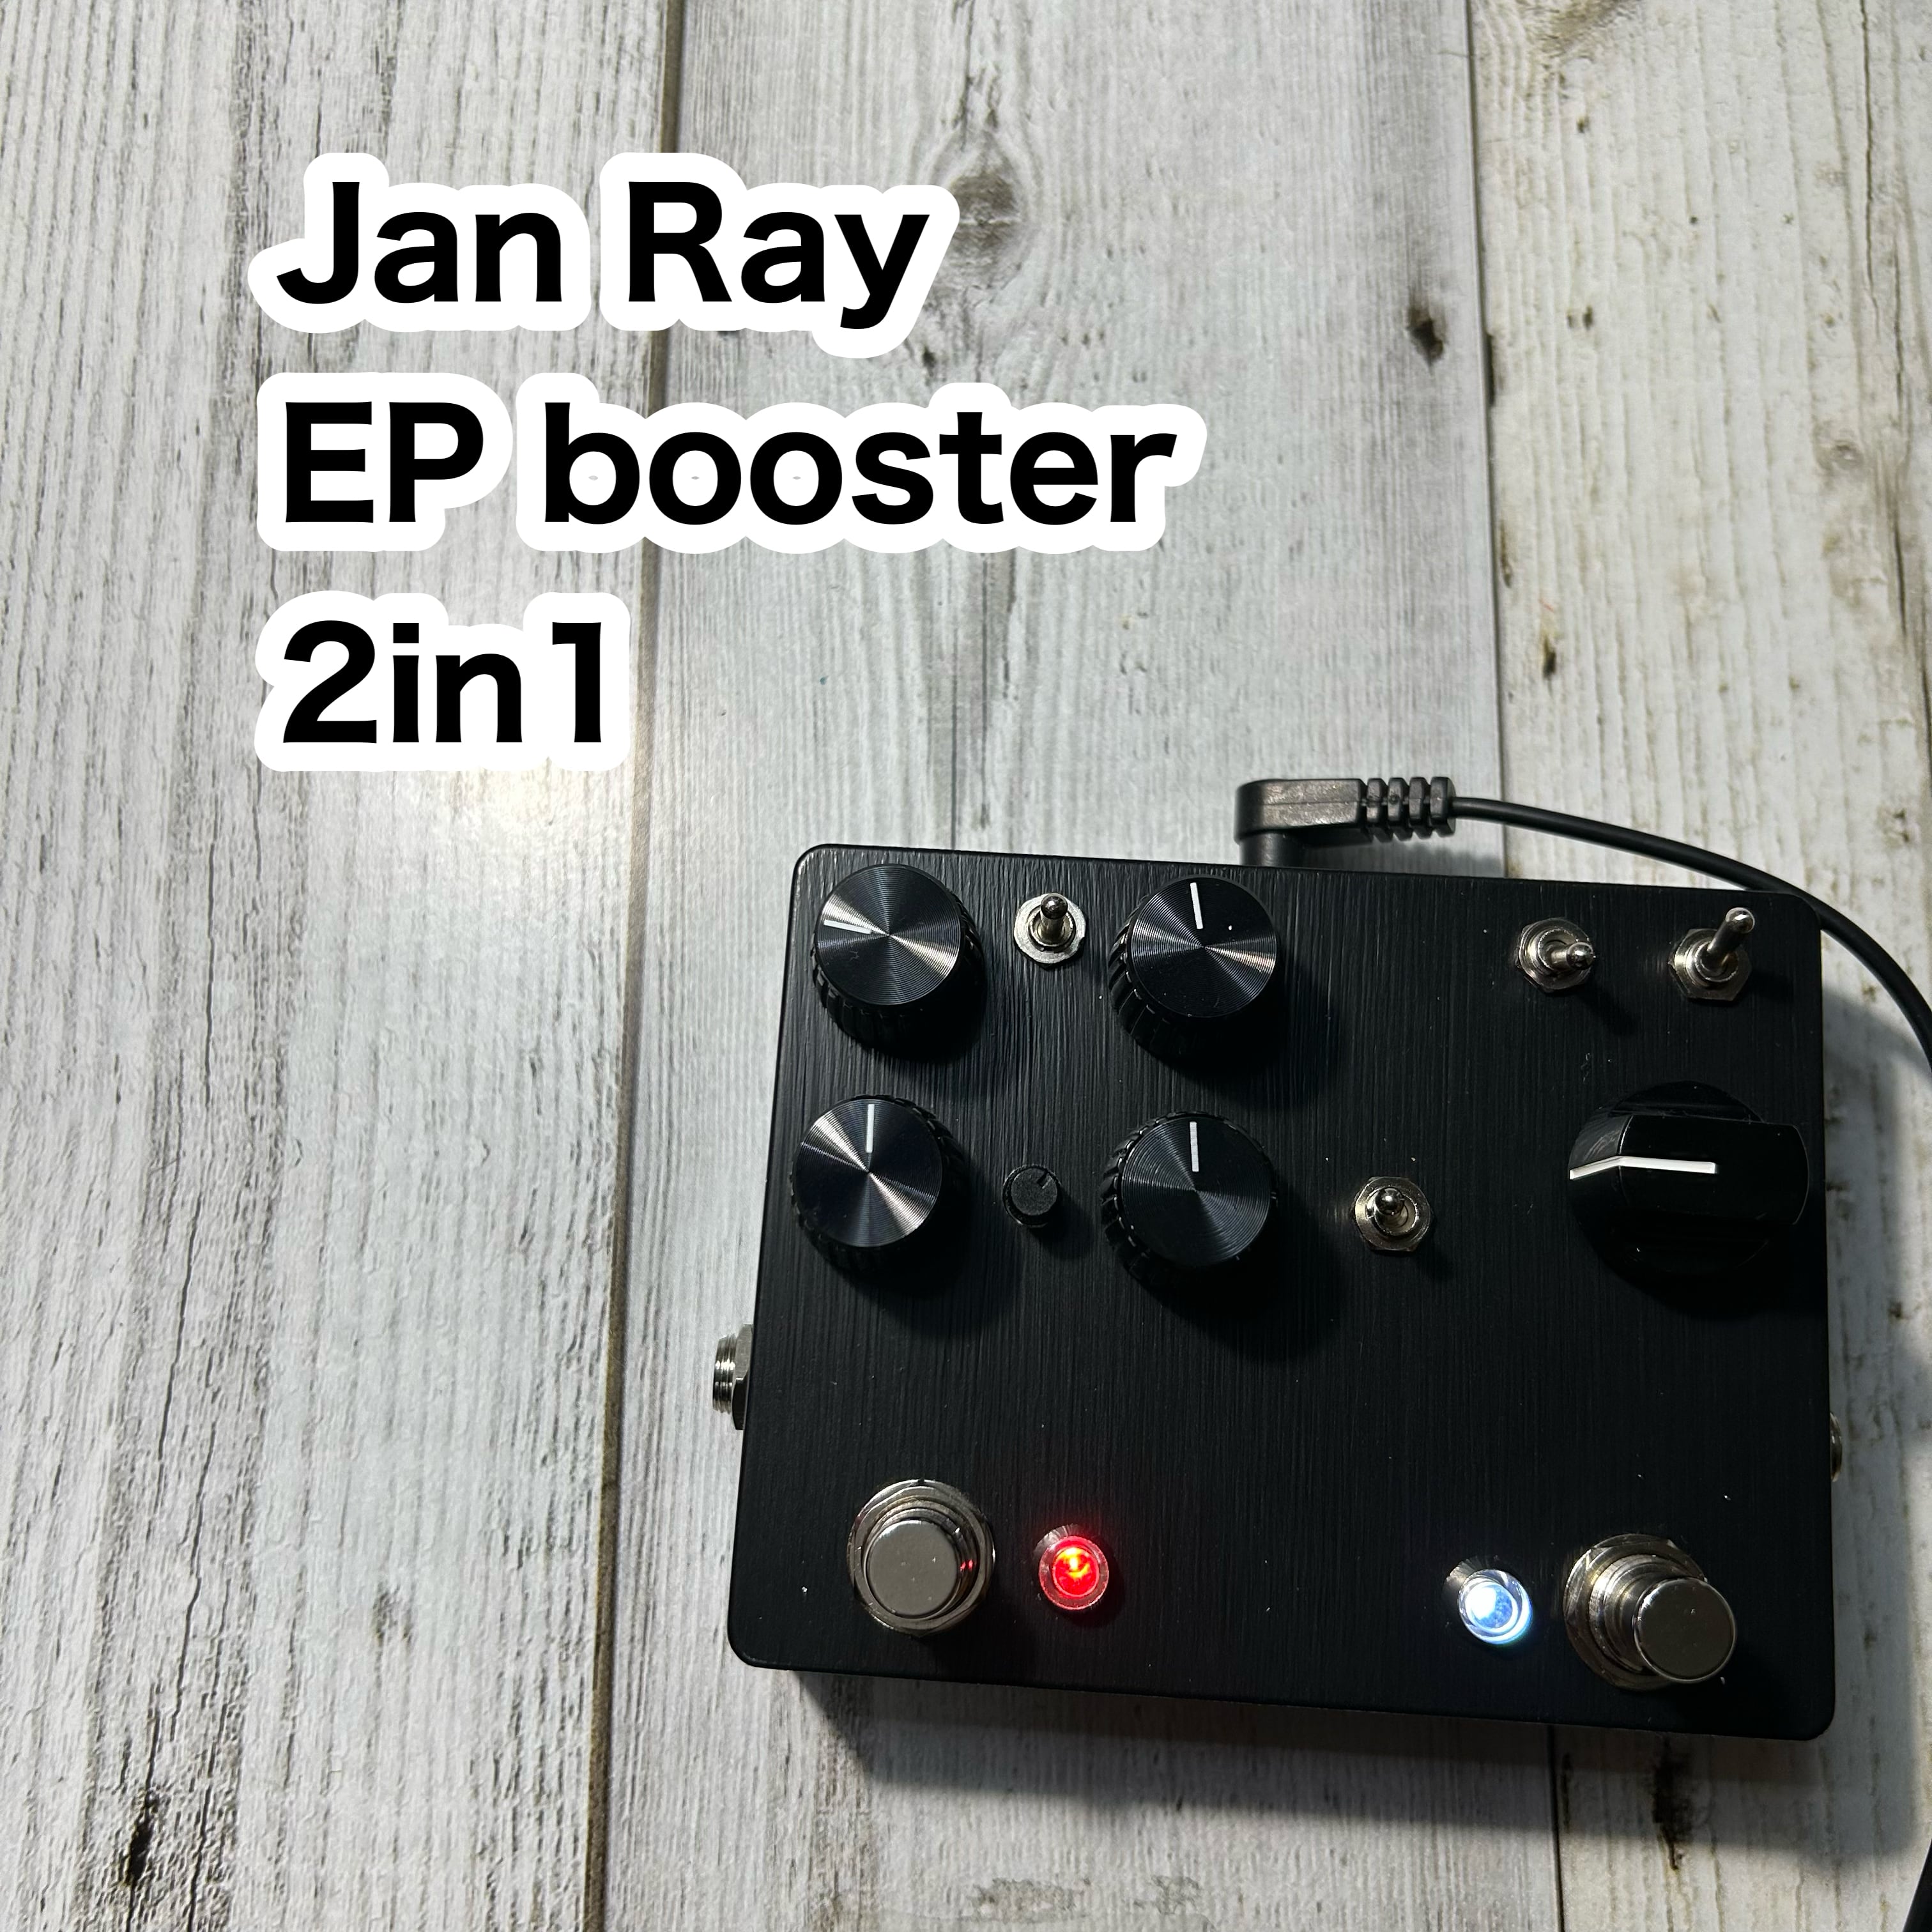 Jan Ray + EP booster 2in1 18v